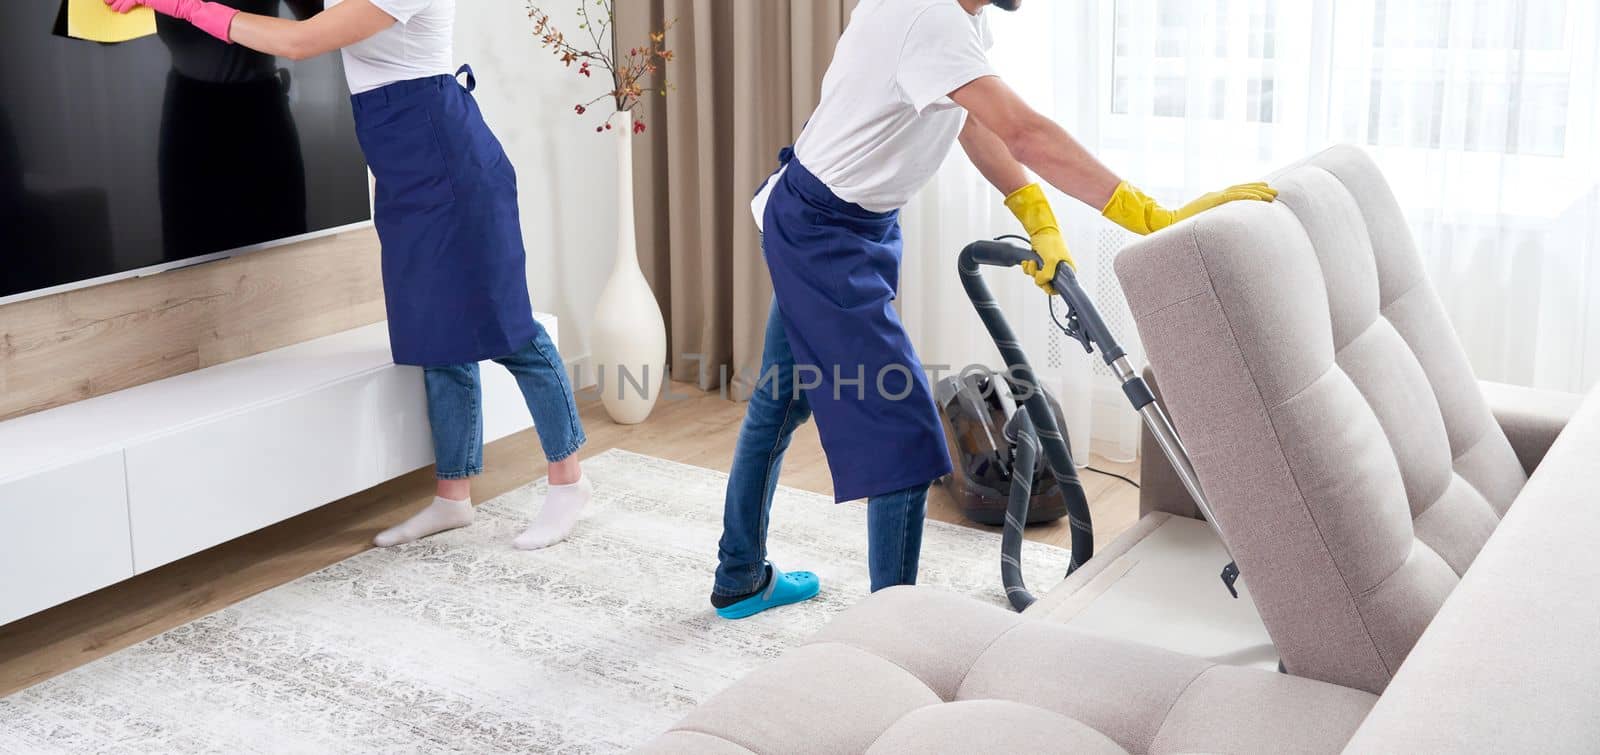 Professional cleaners in blue uniform washing floor and wiping dust from the furniture in the living room of the apartment. Cleaning service concept by Mariakray